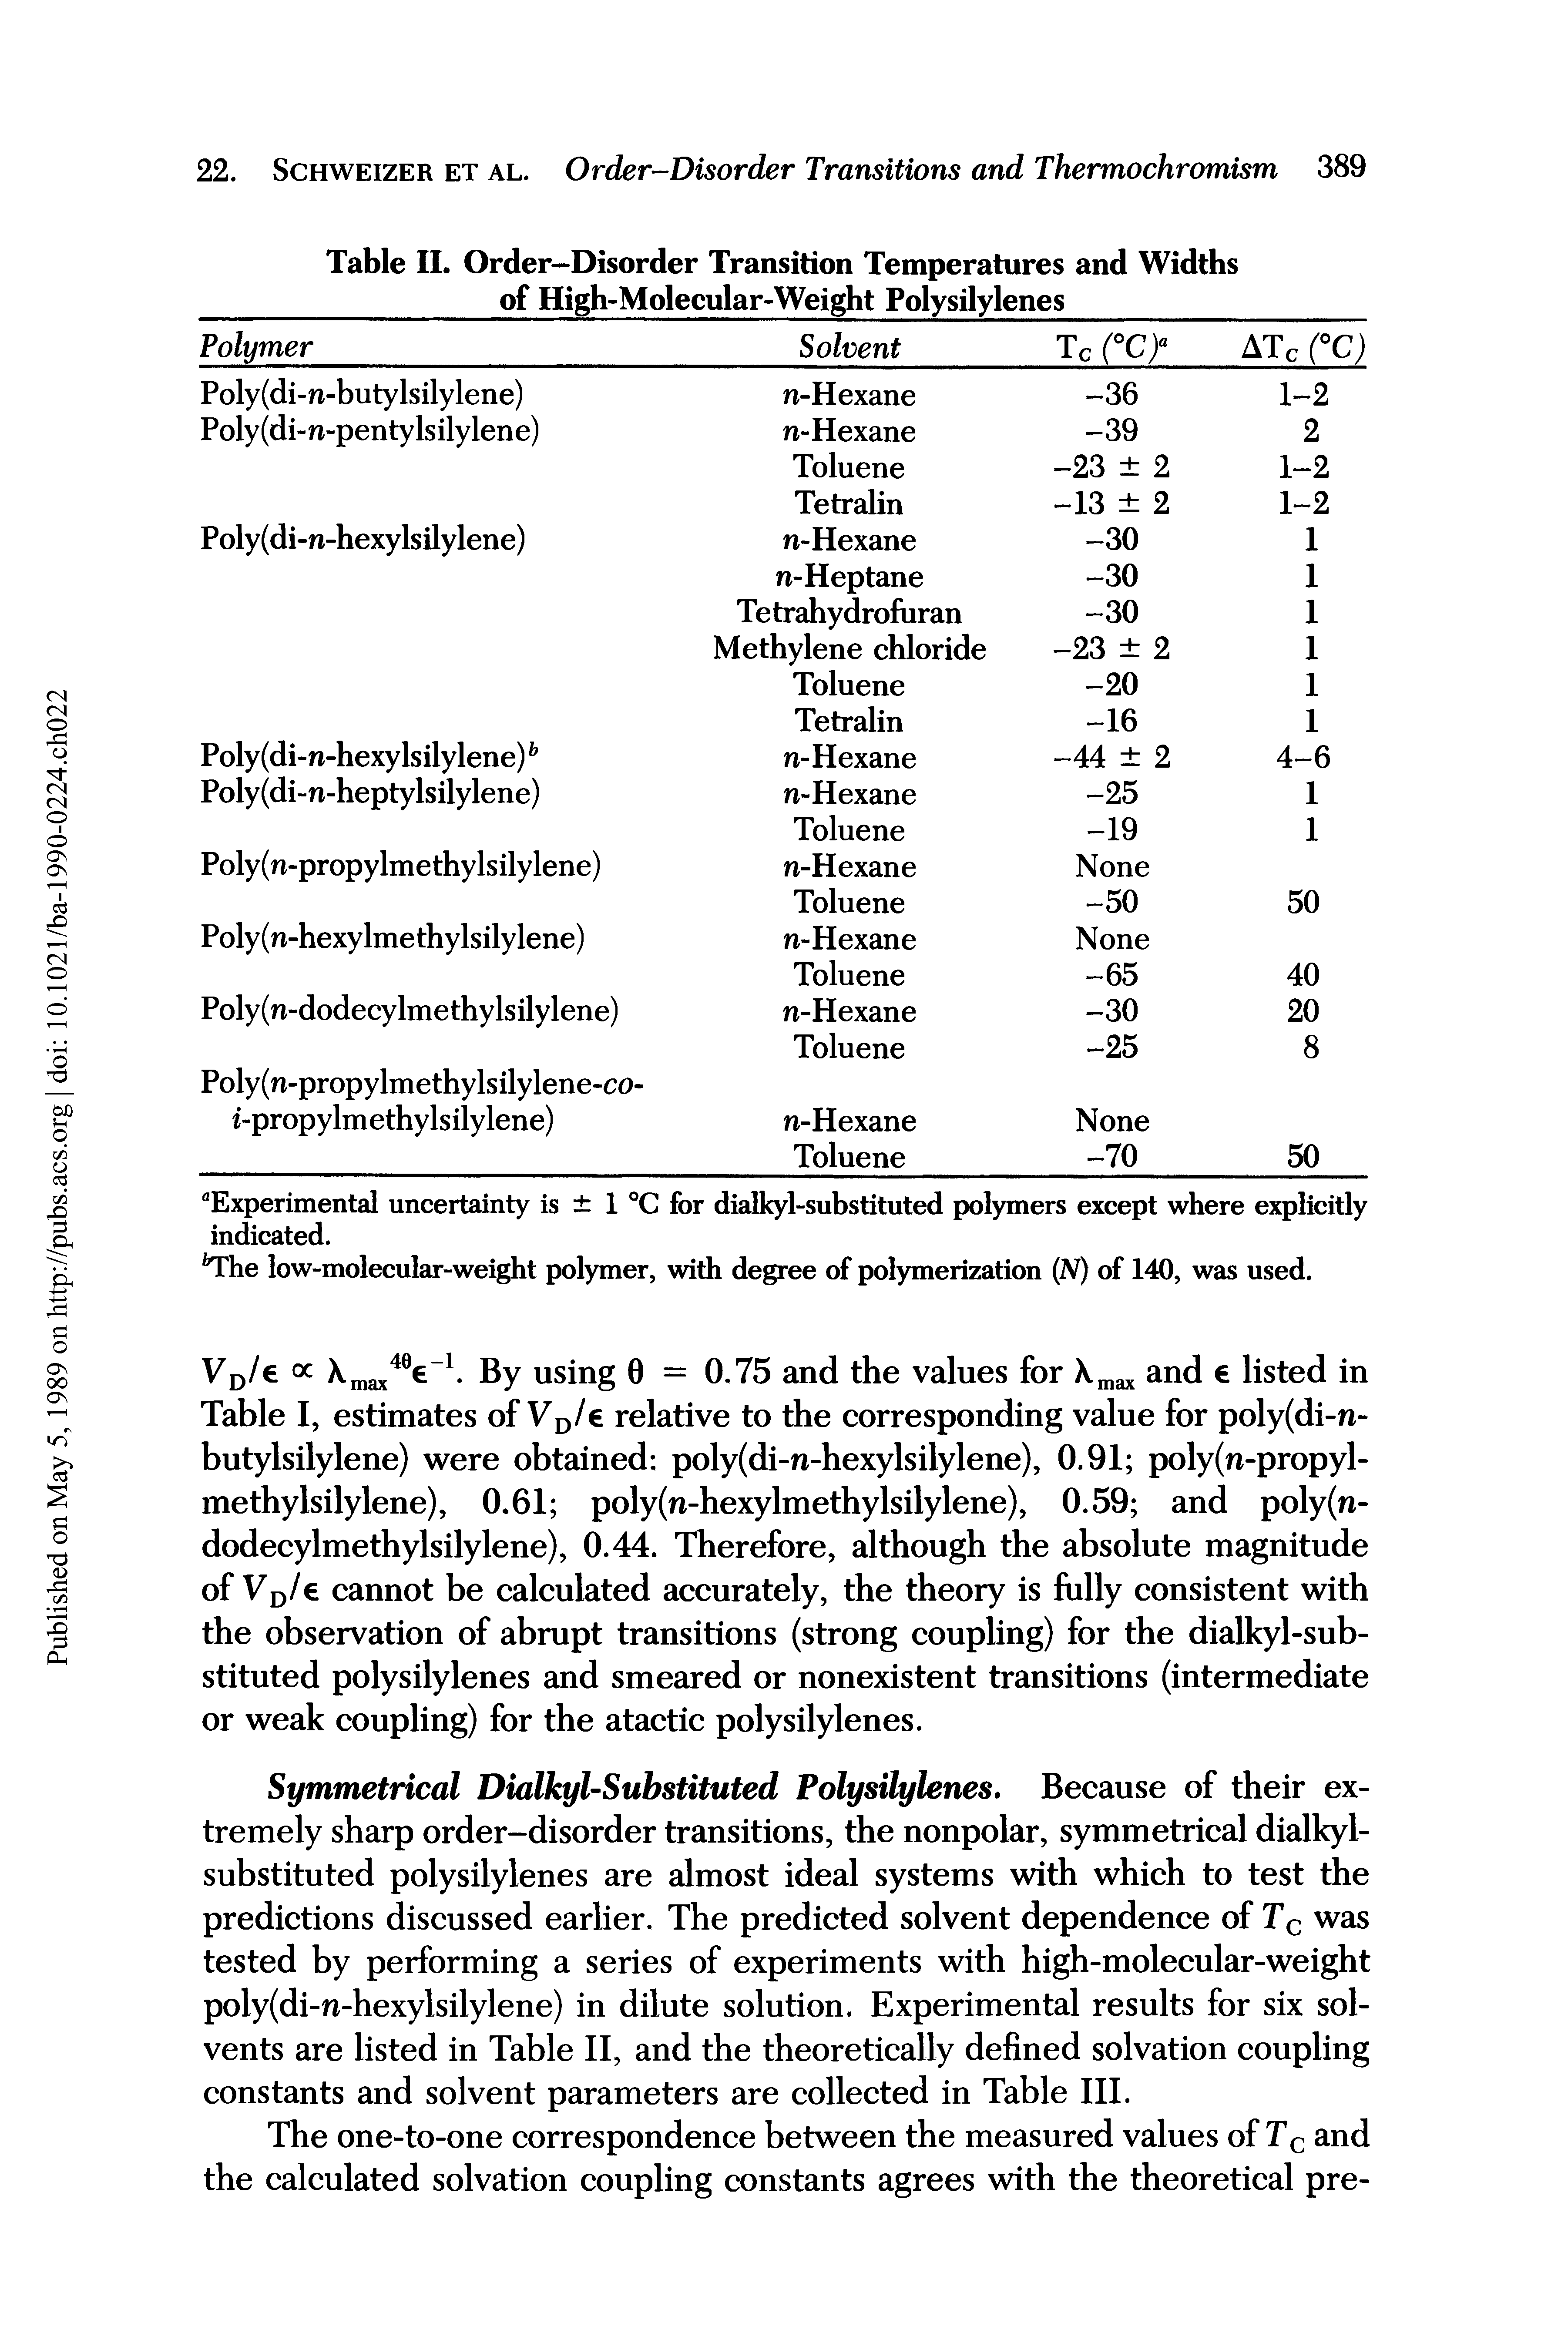 Table I, estimates of Vp/e relative to the corresponding value for poly(di-n-butylsilylene) were obtained poly(di-n-hexylsilylene), 0.91 poly(n-propyl-inethylsilylene), 0.61 poly(n-hexylmethylsilylene), 0.59 and poly(n-dodecylmethylsilylene), 0.44. Therefore, although the absolute magnitude of Vp/e cannot be calculated accurately, the theory is fully consistent with the observation of abrupt transitions (strong coupling) for the dialkyl-substituted polysilylenes and smeared or nonexistent transitions (intermediate or weak coupling) for the atactic polysilylenes.